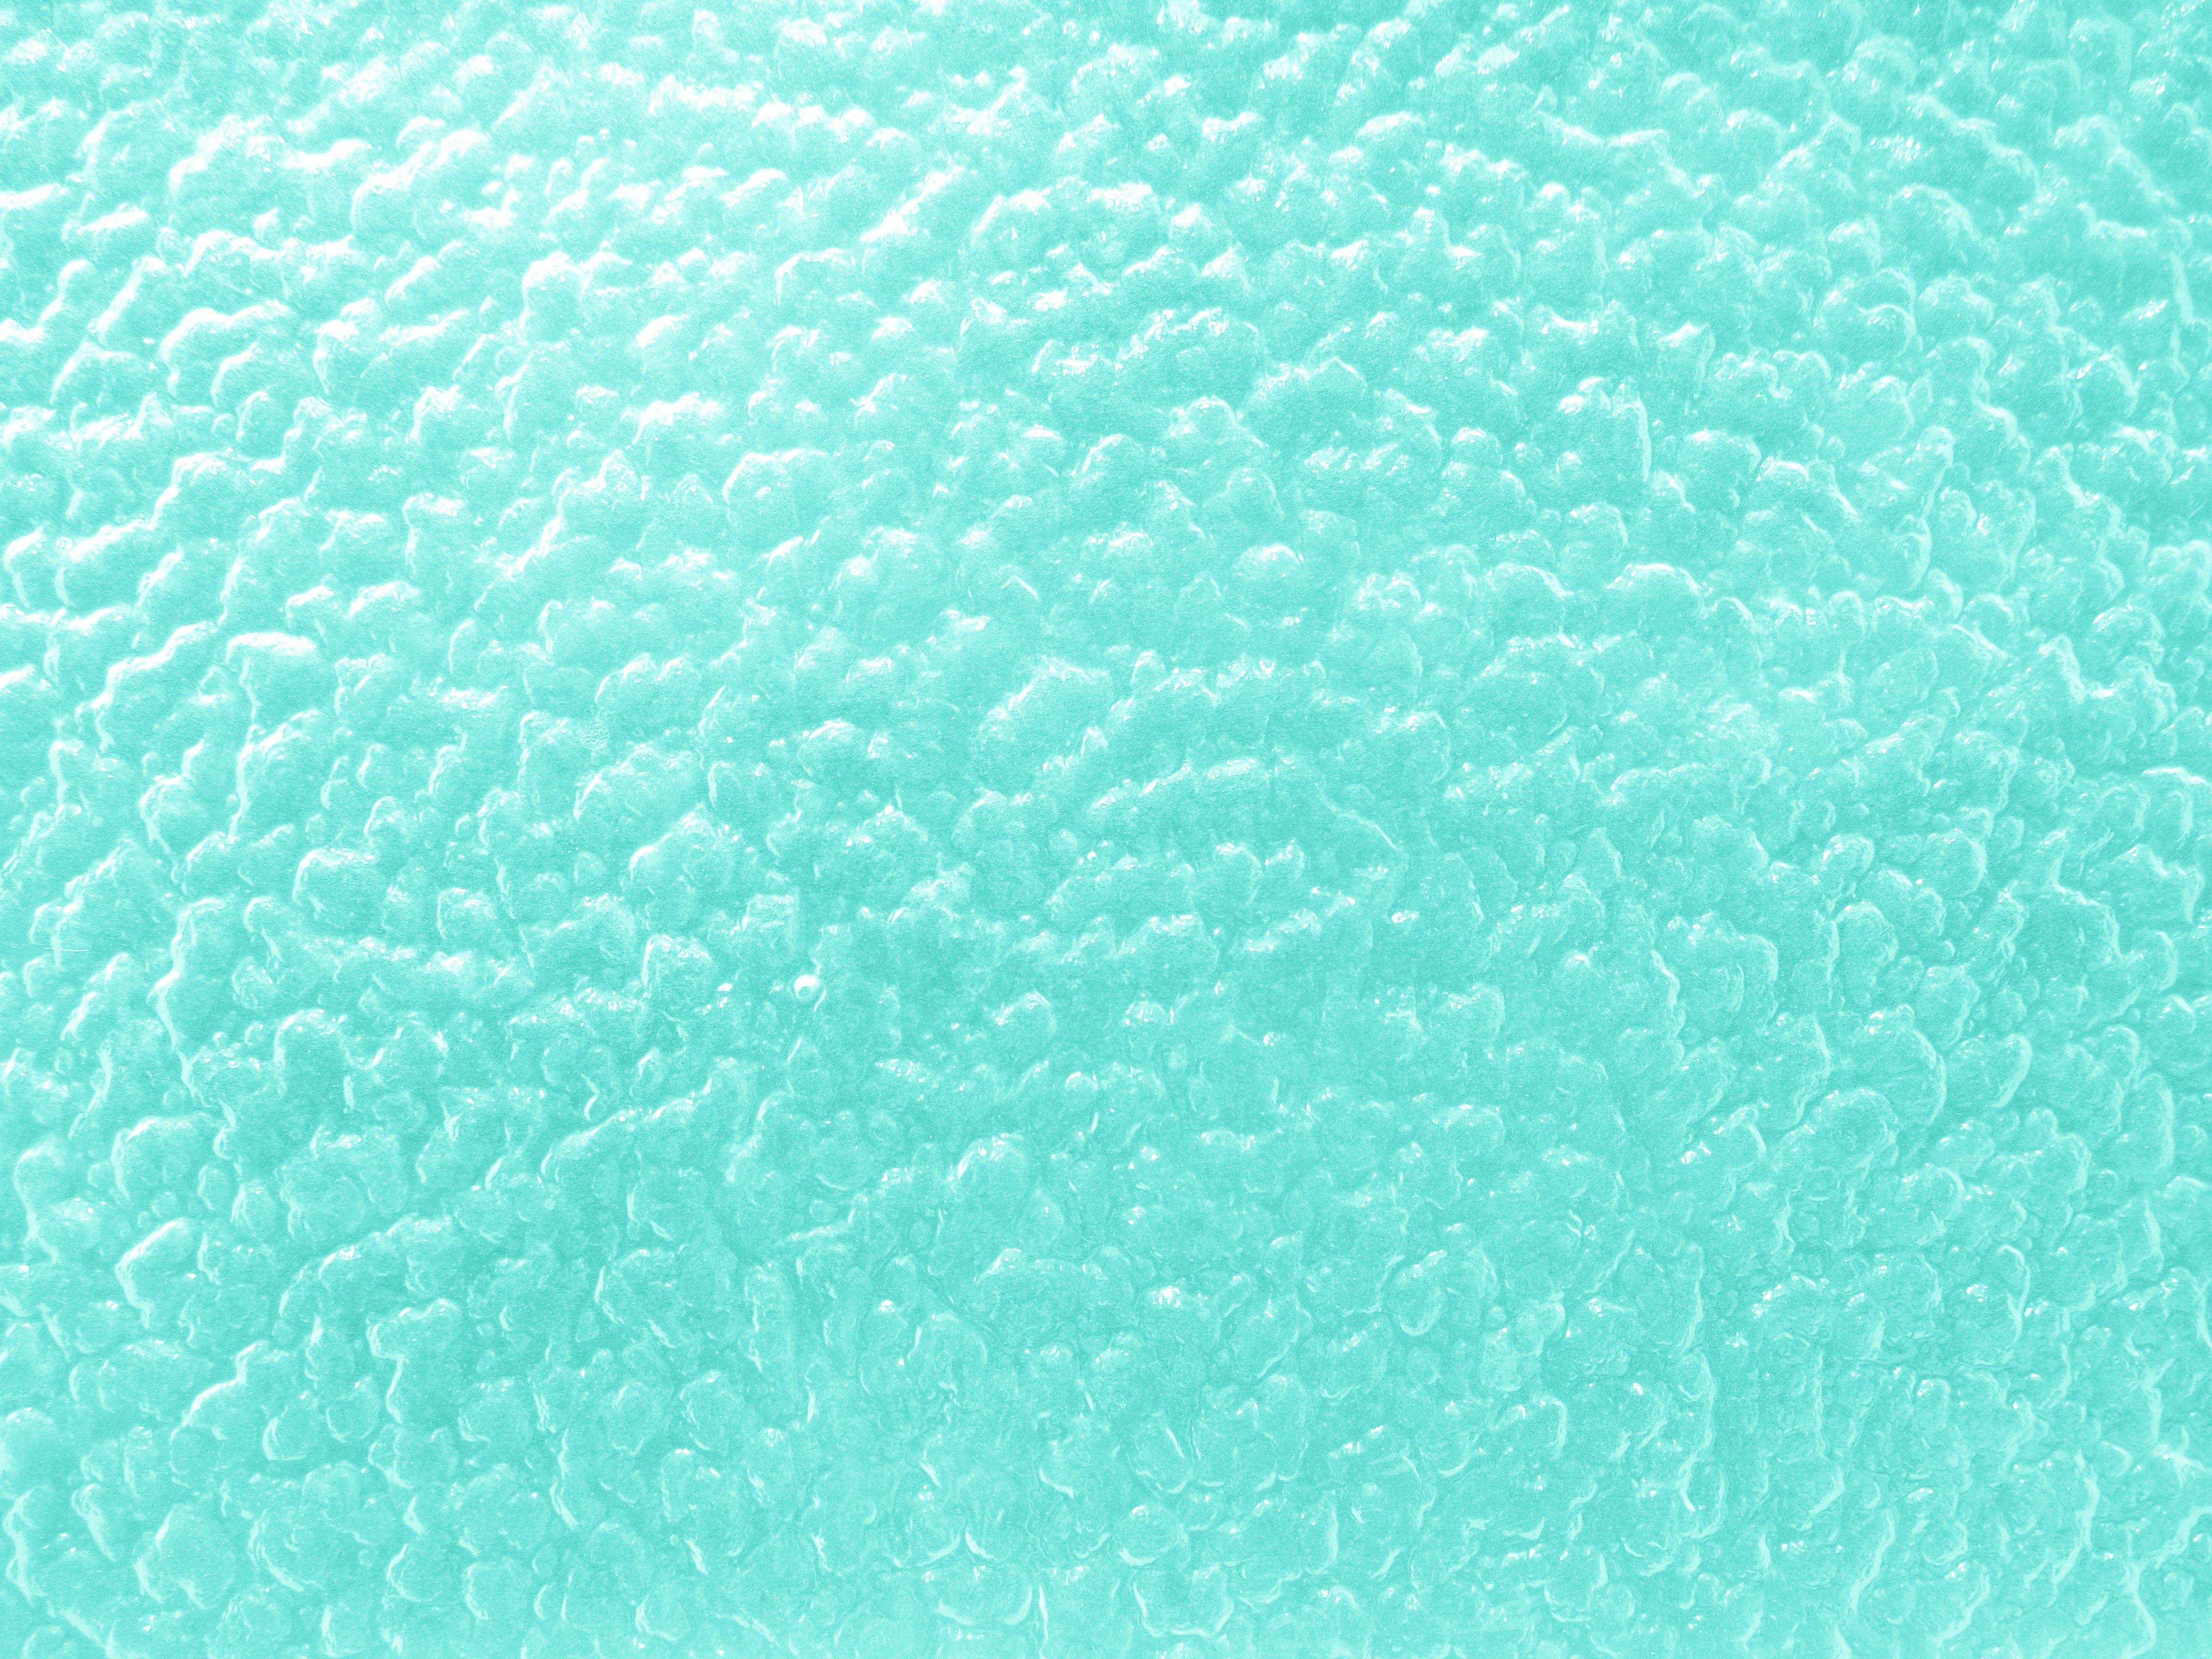 turquoise textured wallpaper turquoise textured glass with bumpy